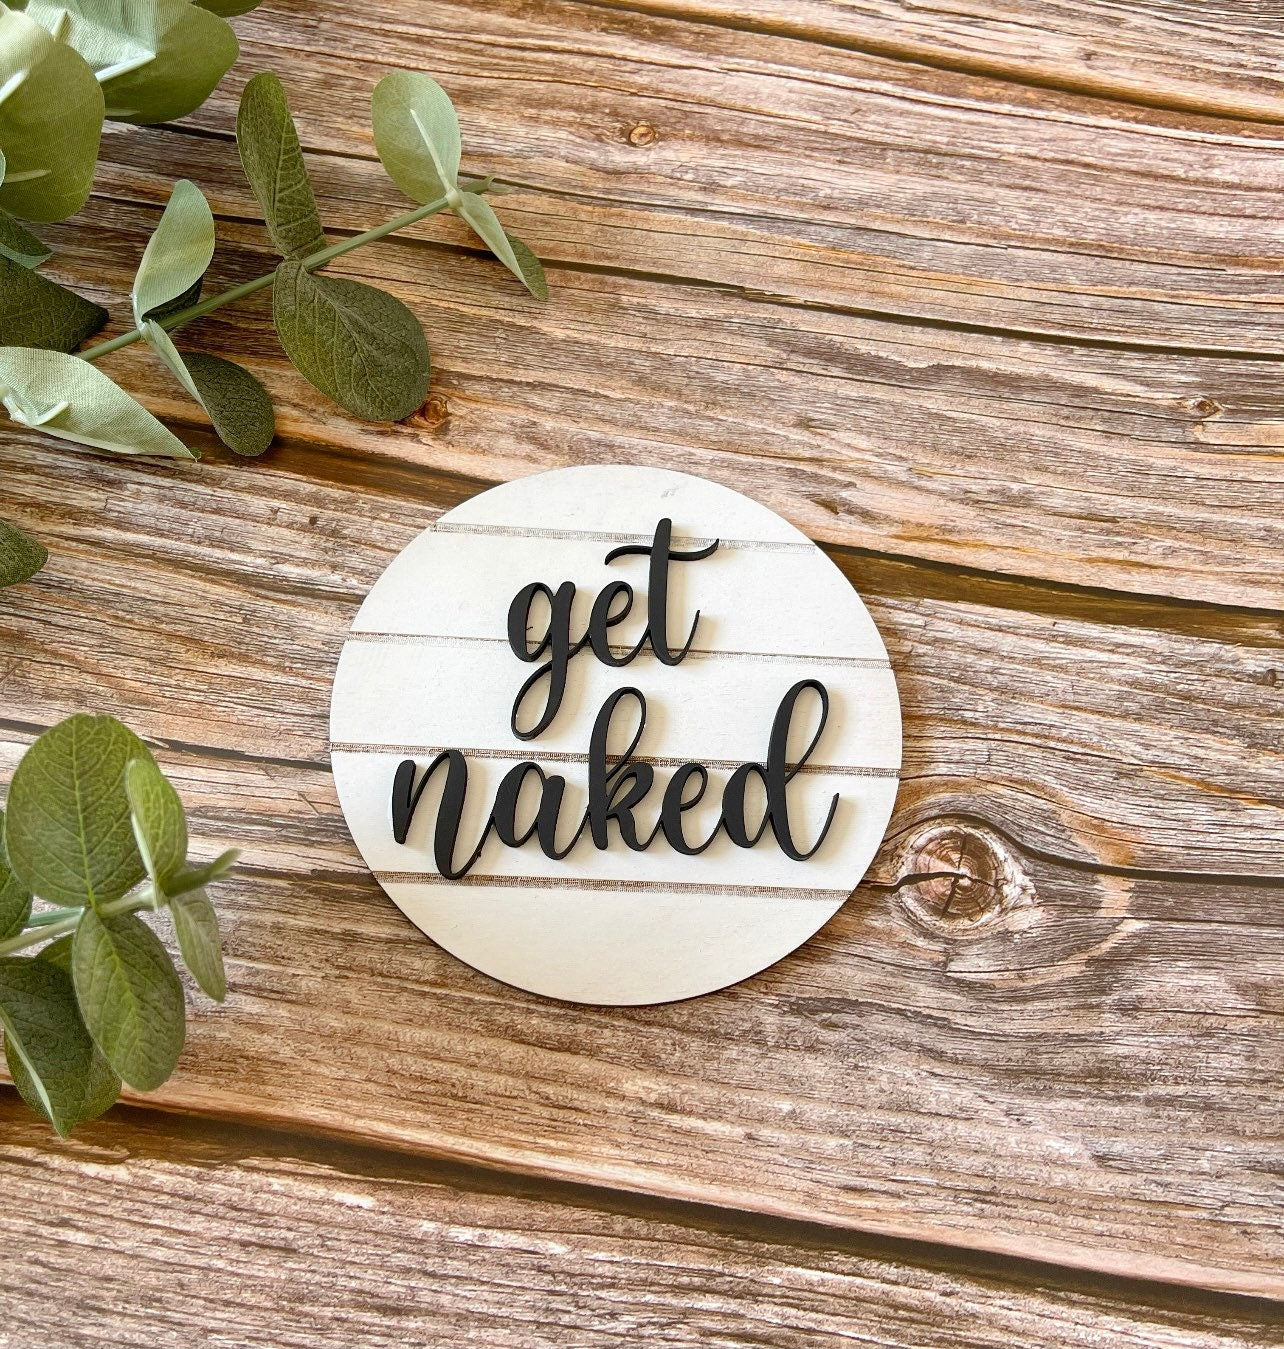 Get naked mini Shiplap circle sign, mini get naked sign for bathroom